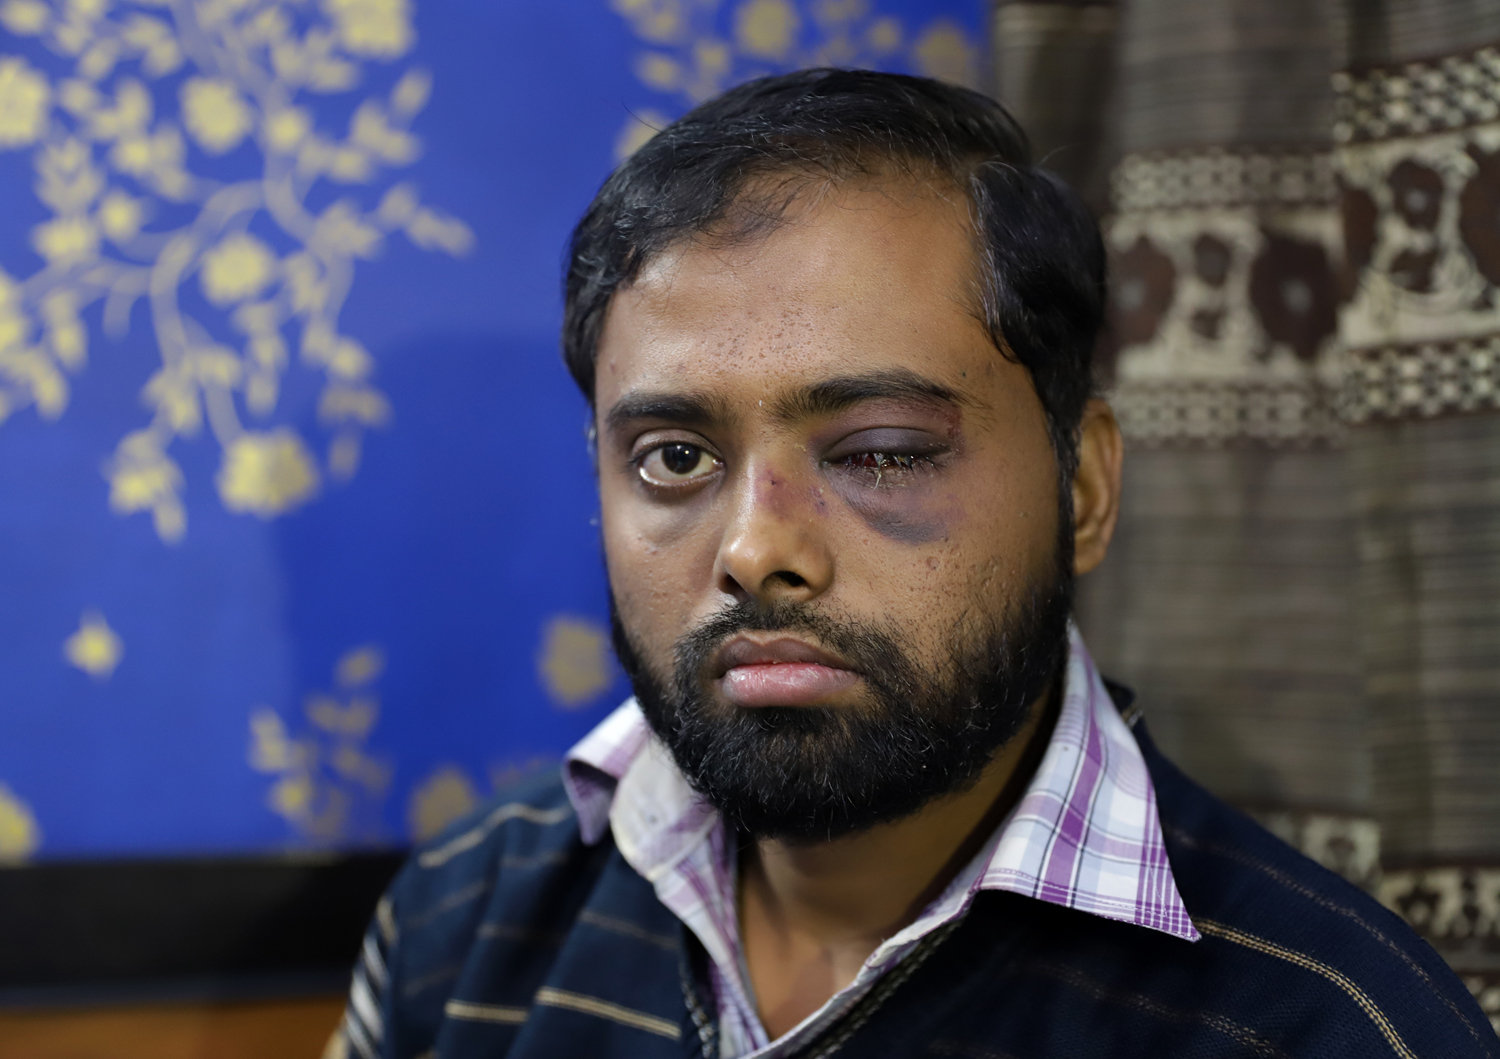 There is fear, but I will not lose hope: Jamia student who lost an eye during an attack by Delhi Police